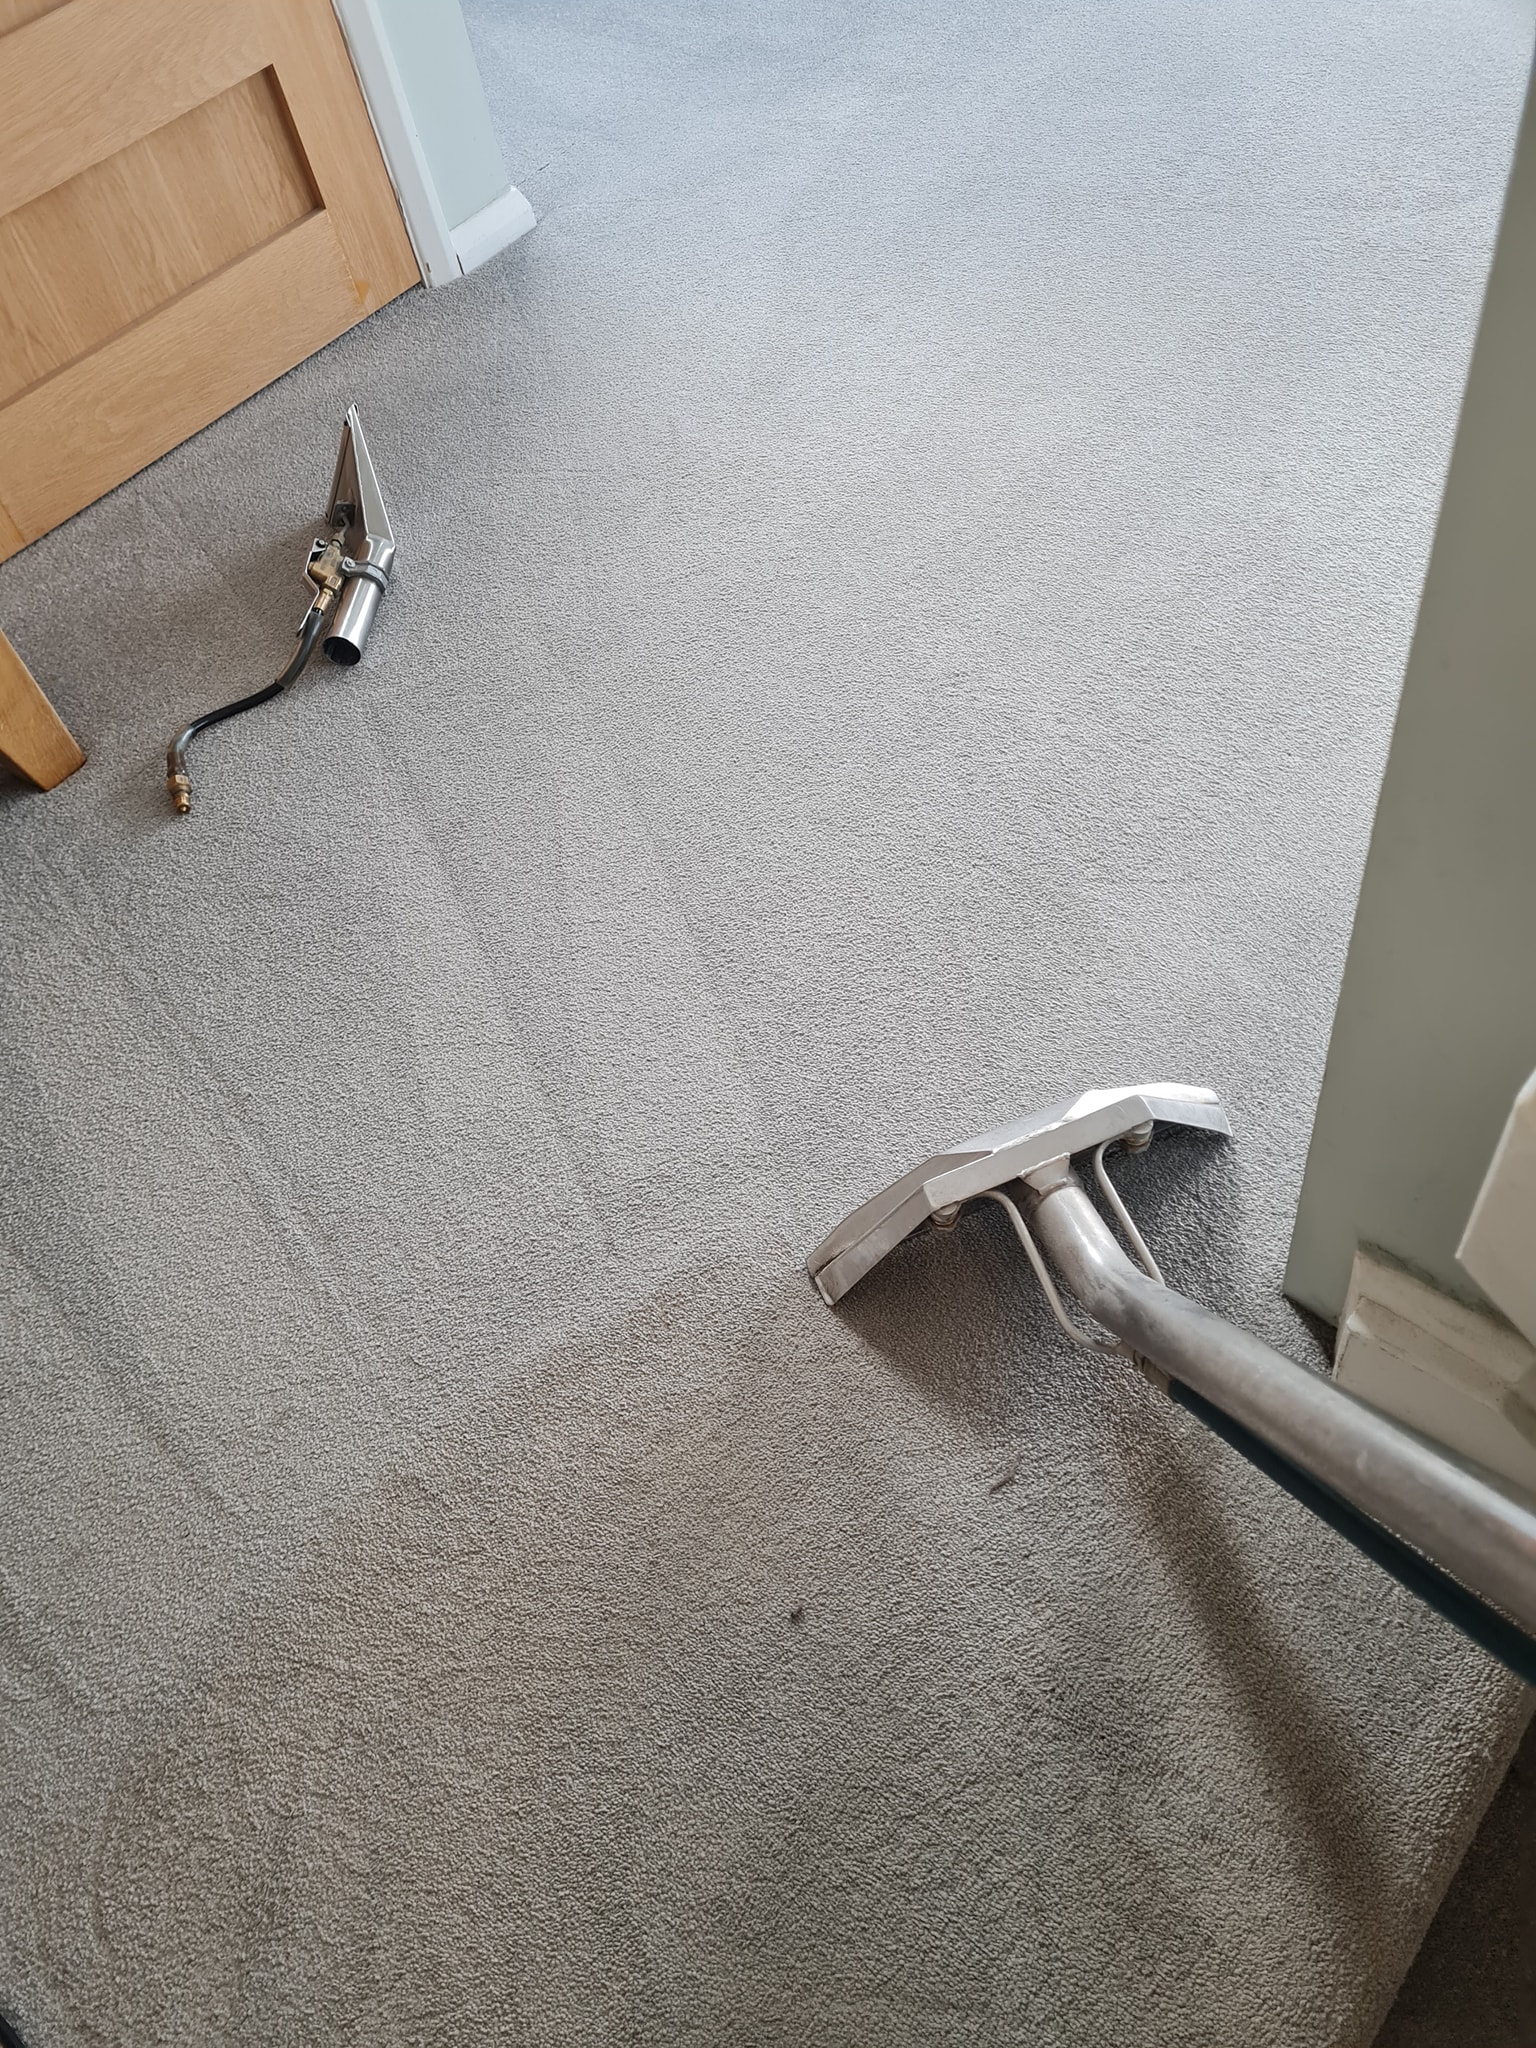 starting a carpet cleaning business australia